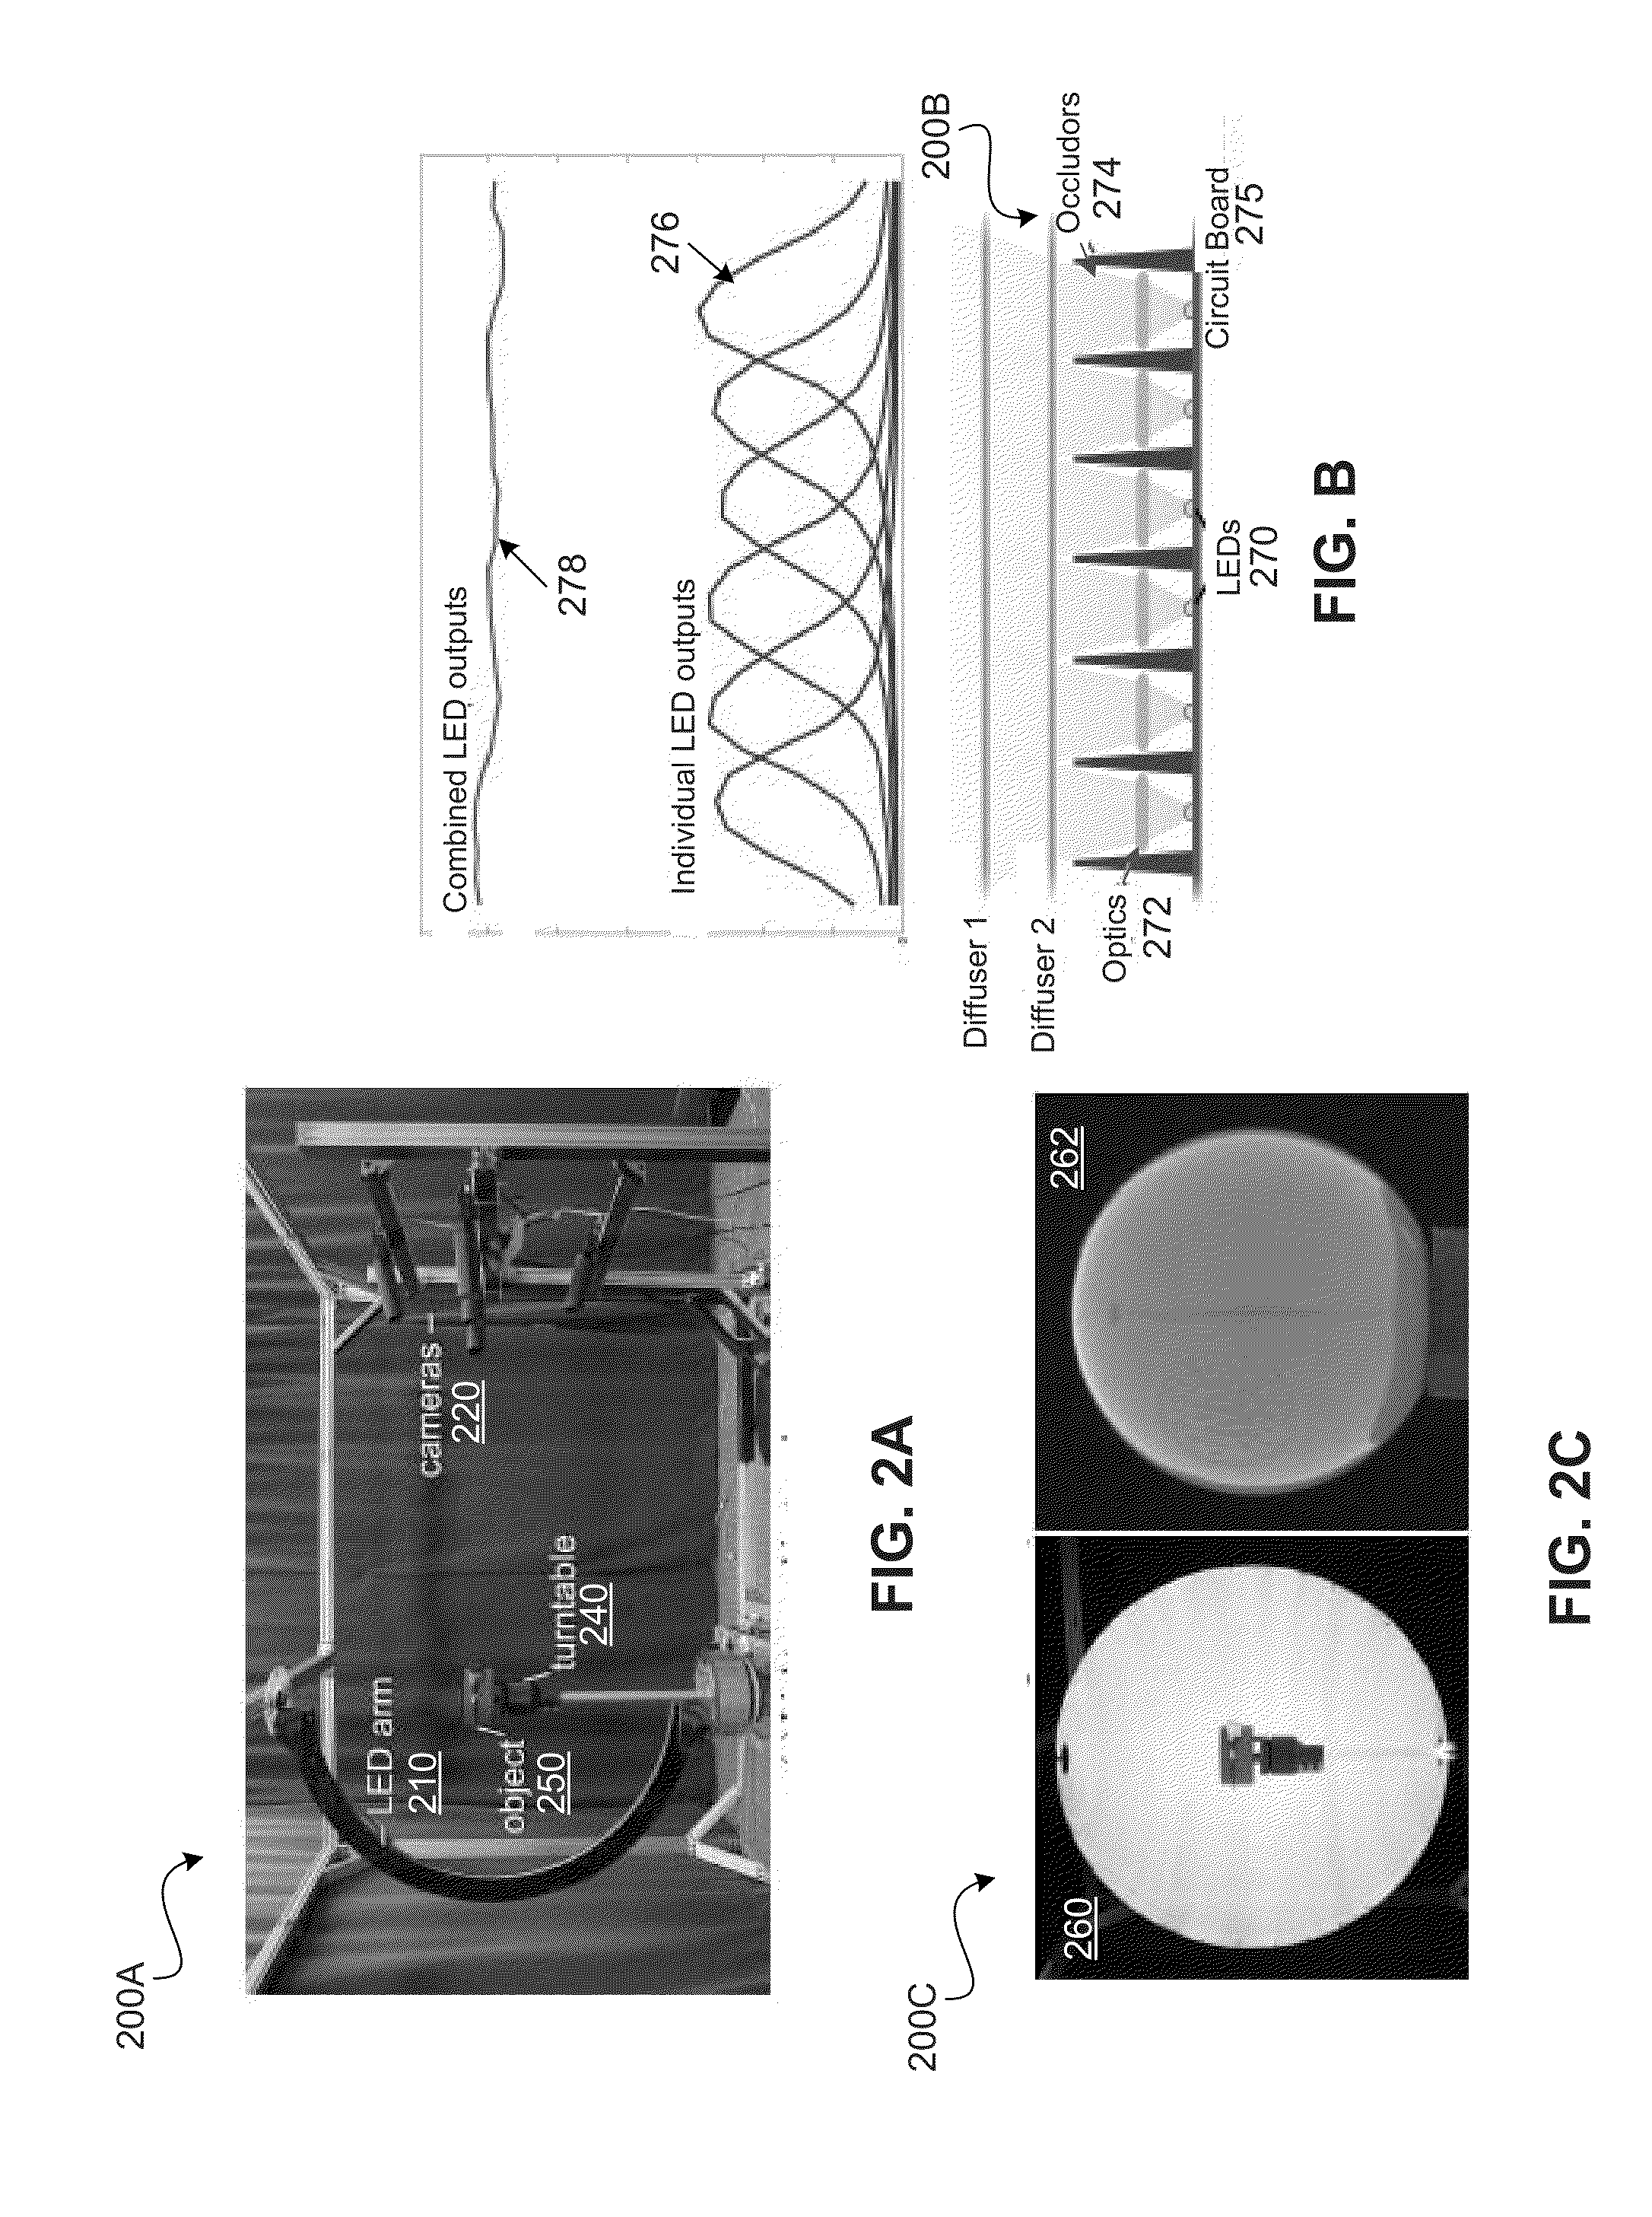 Specular object scanner for measuring reflectance properties of objects